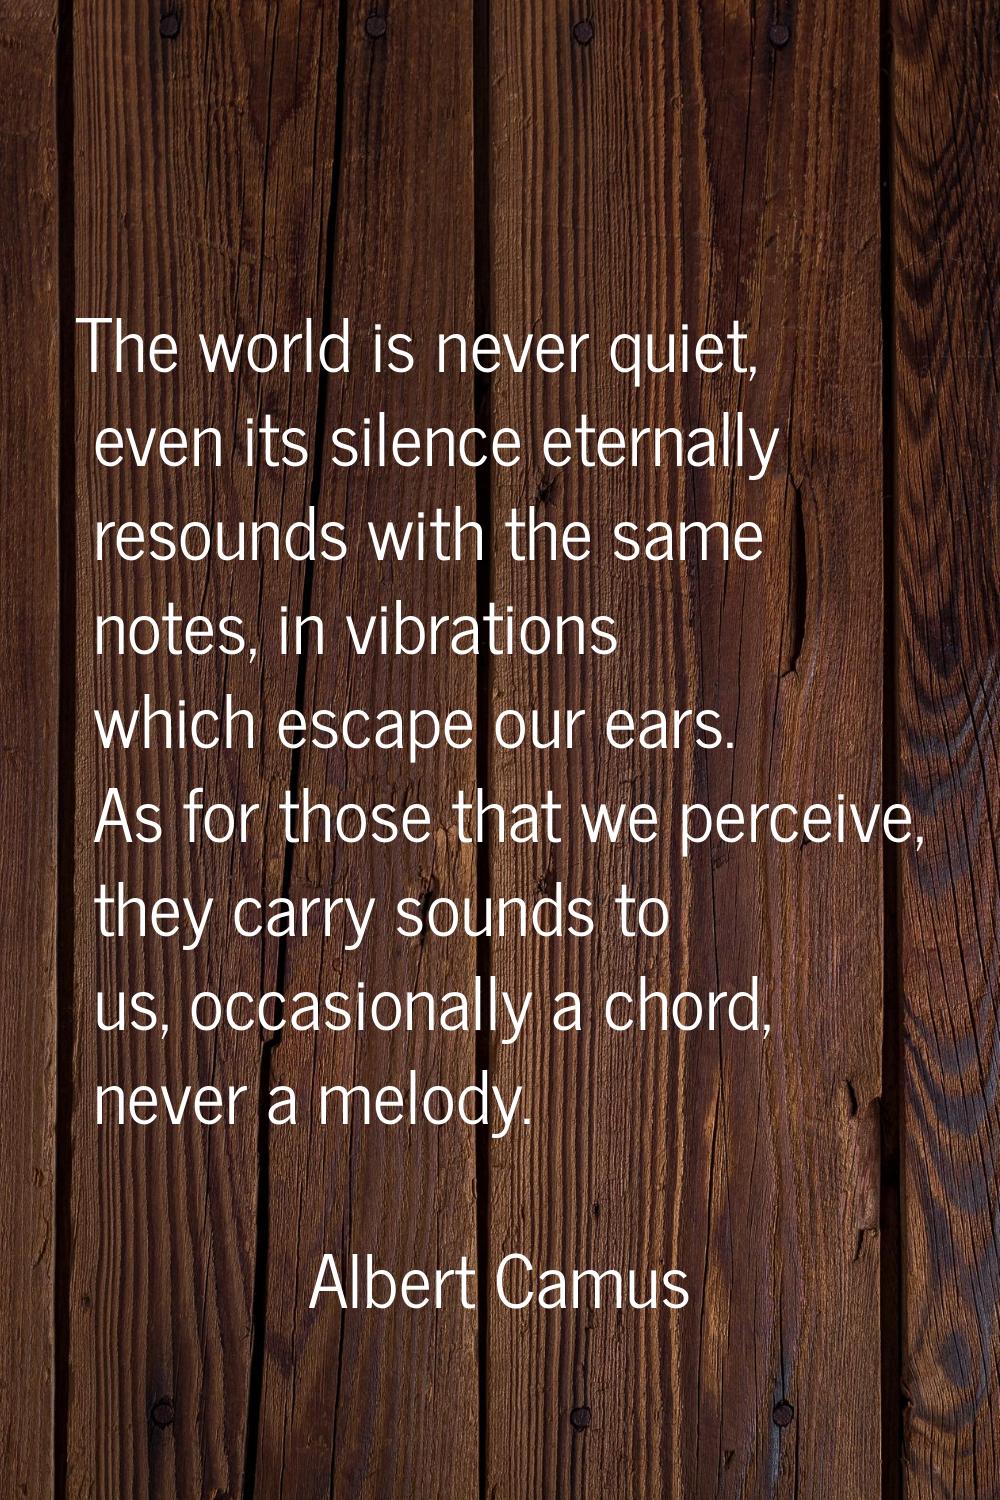 The world is never quiet, even its silence eternally resounds with the same notes, in vibrations wh